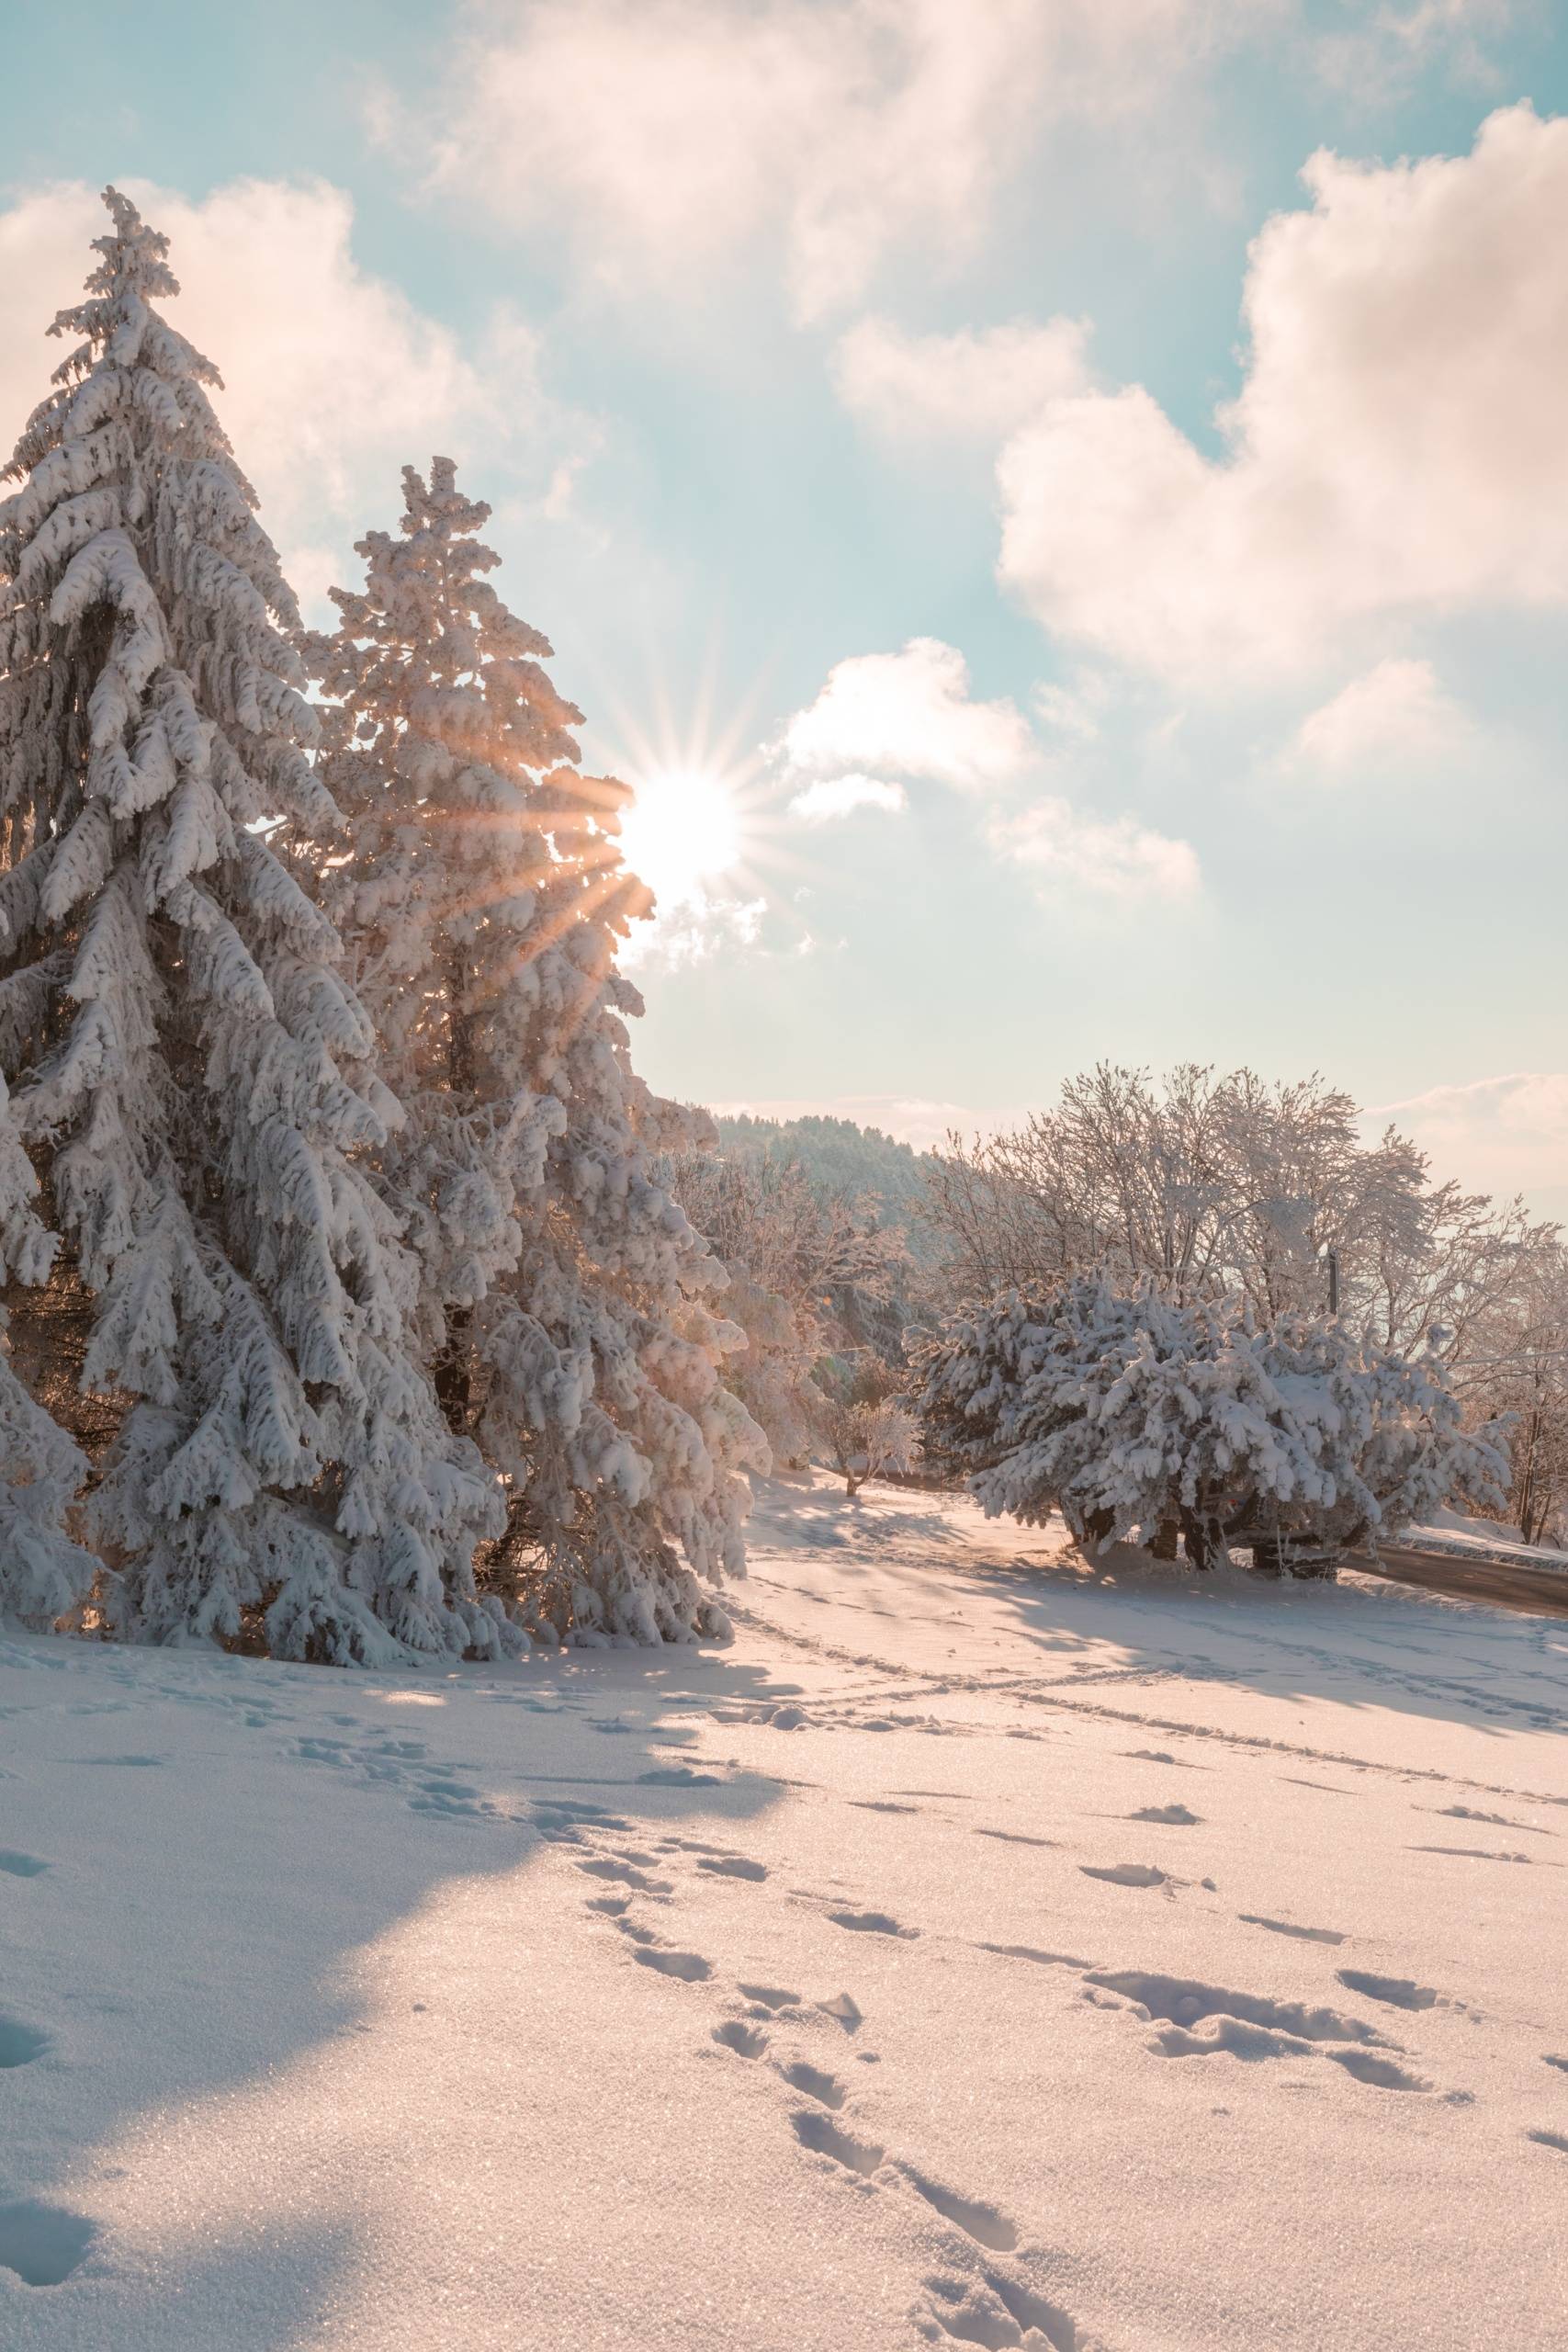 A snow covered field with trees and the sun - Winter, cozy, snow, landscape